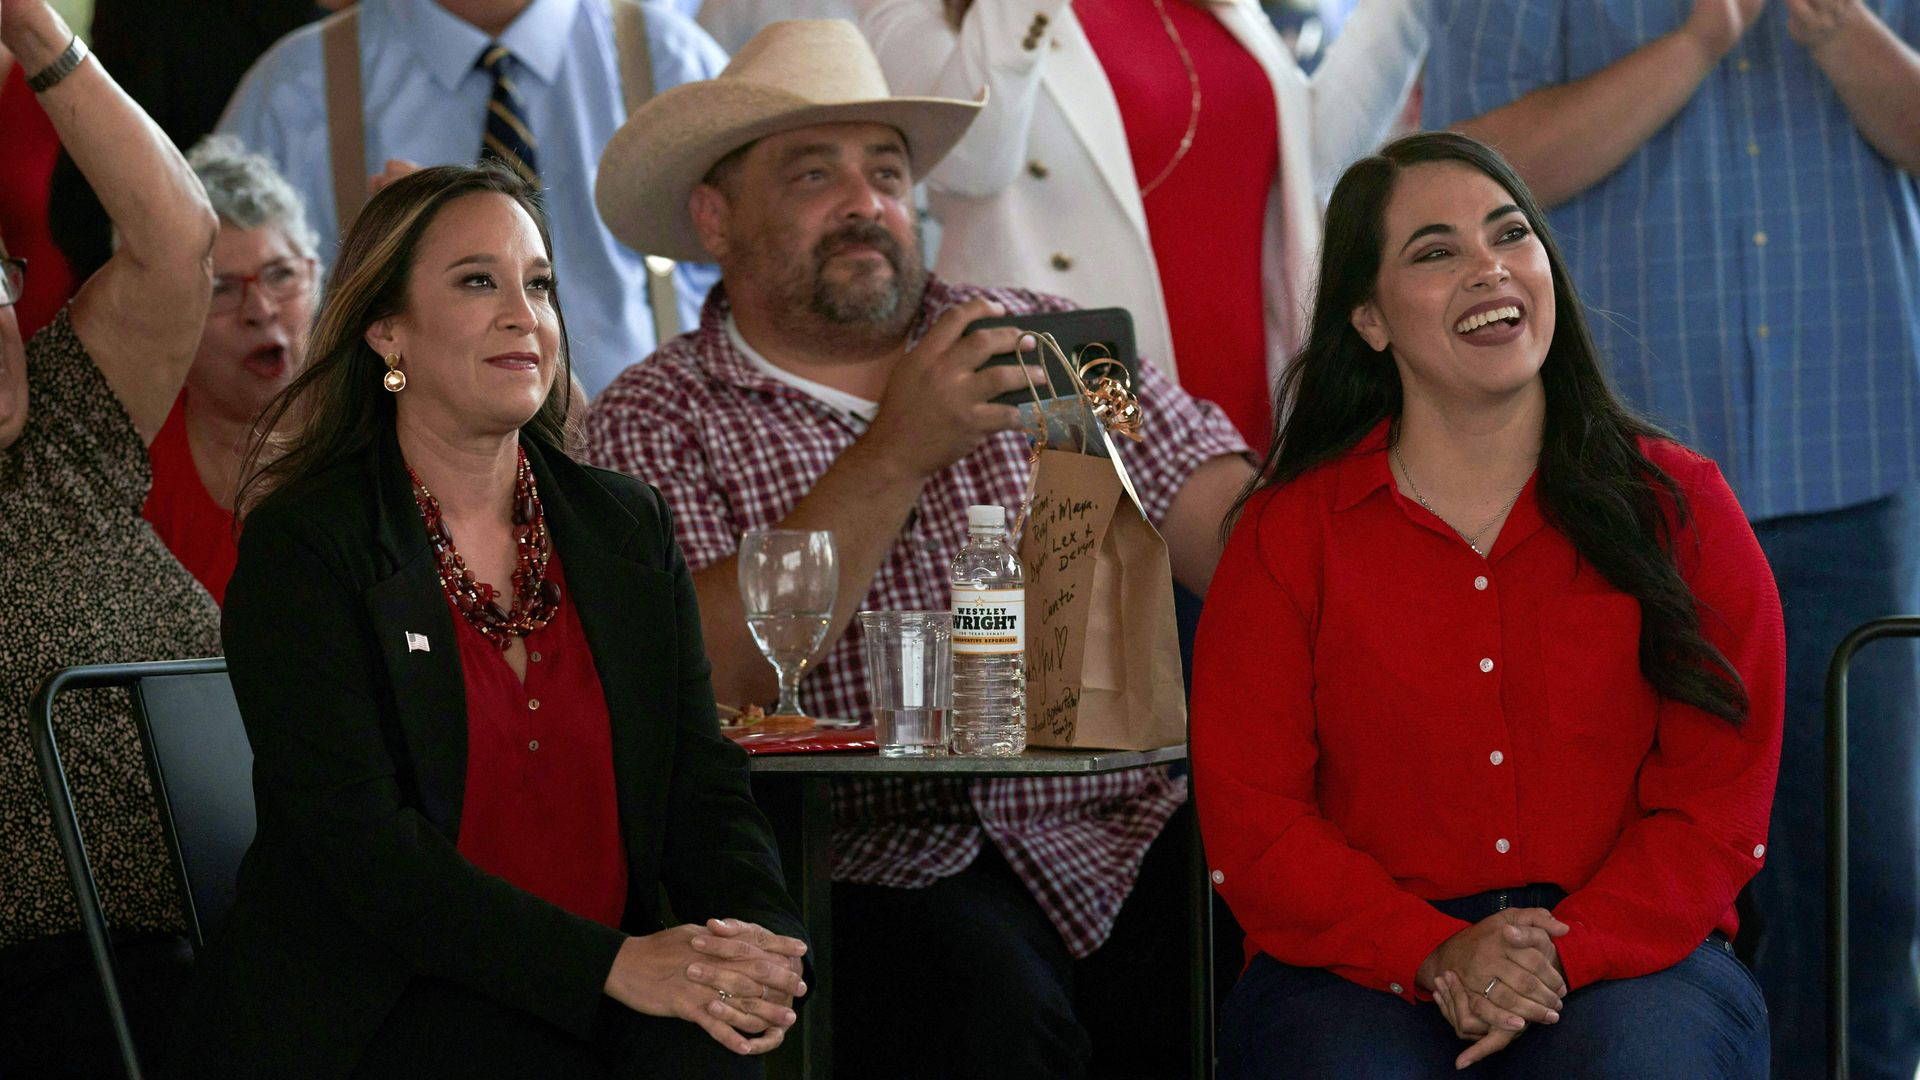 US Republican congressional candidate Monica De La Cruz (L) and Representative Mayra Flores (R) of Texas, who is running for reelection, attend a campaign event 